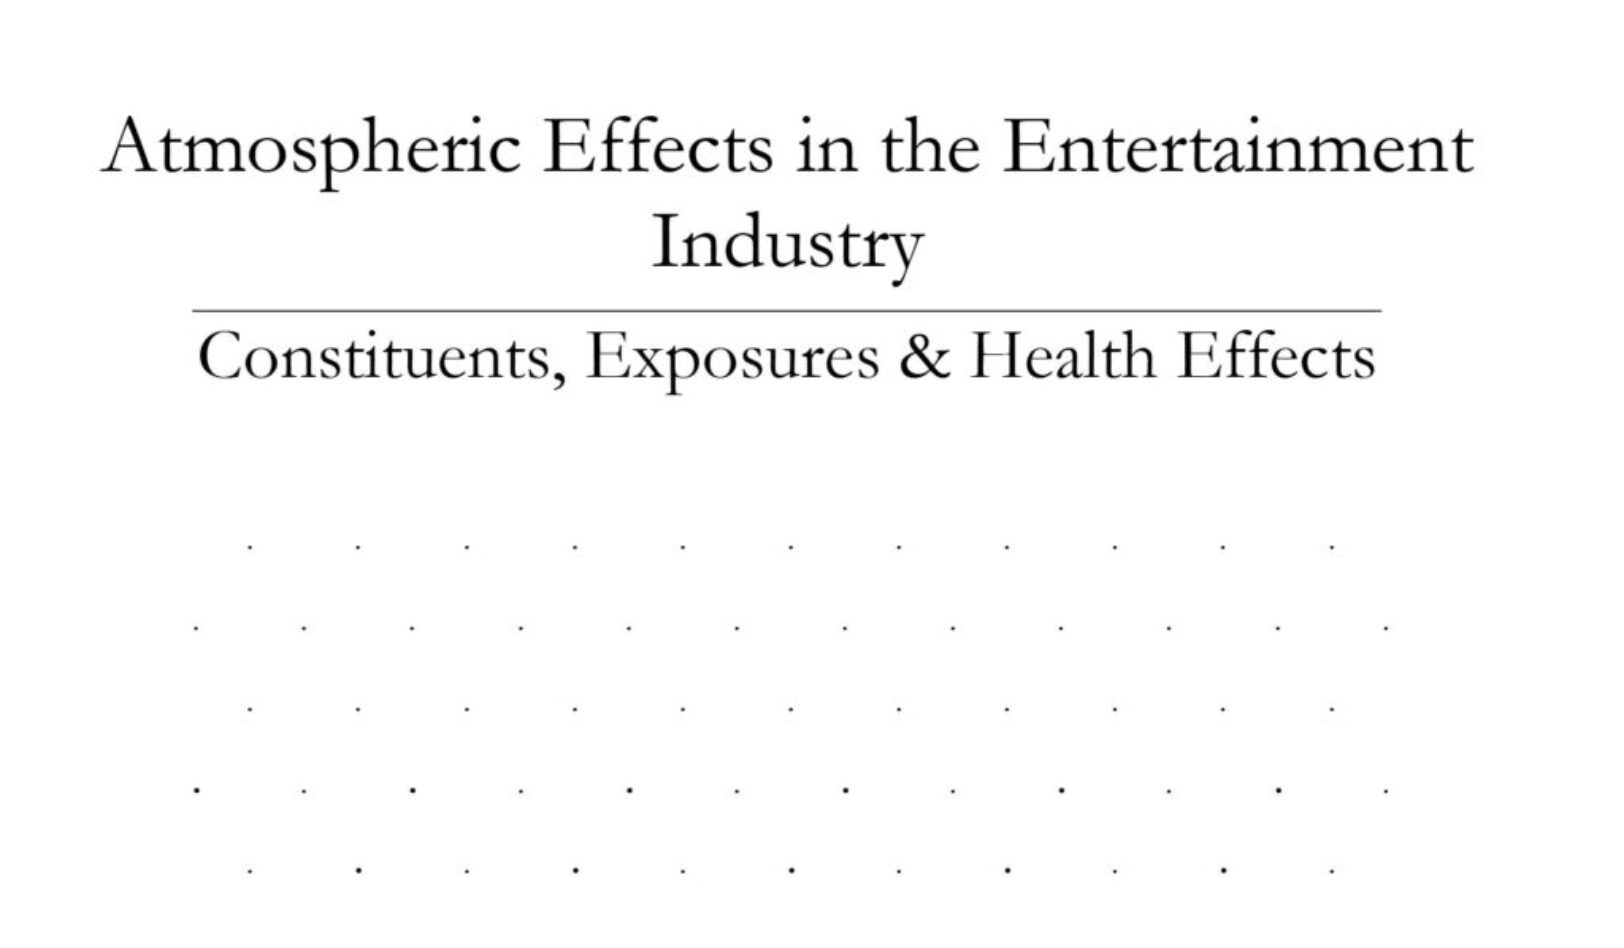 Atmospheric Effects in the Entertainment Industry